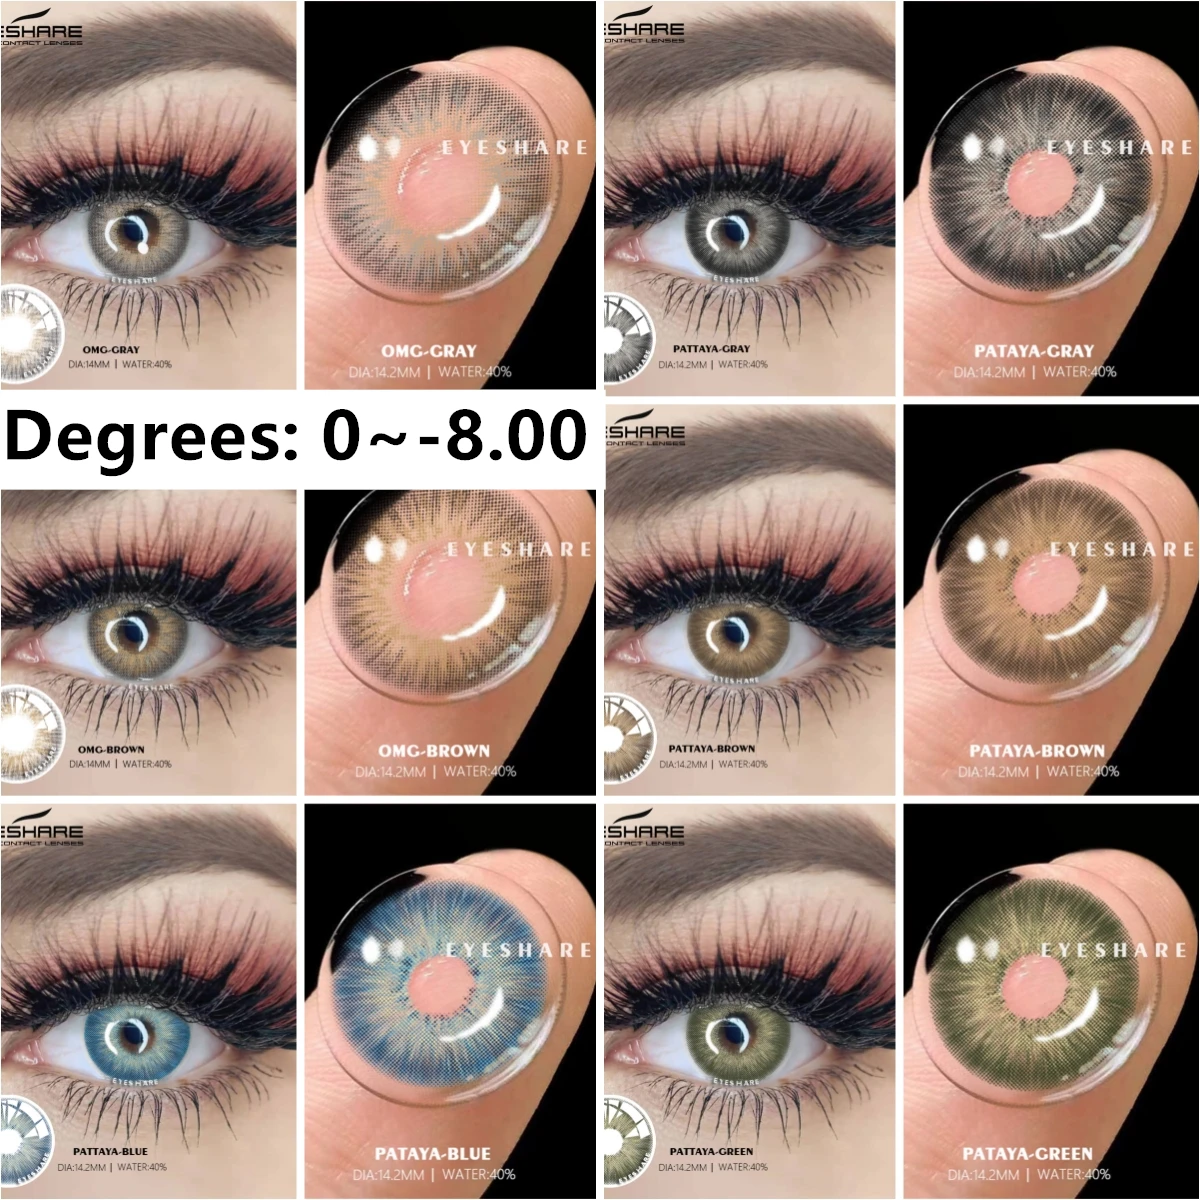 

EYESHARE Myopia Color Contact Lens Degree 2Pcs Color Lenses For Eyes Prescription Natural Cosmetic Diopters Yearly Contact Lens